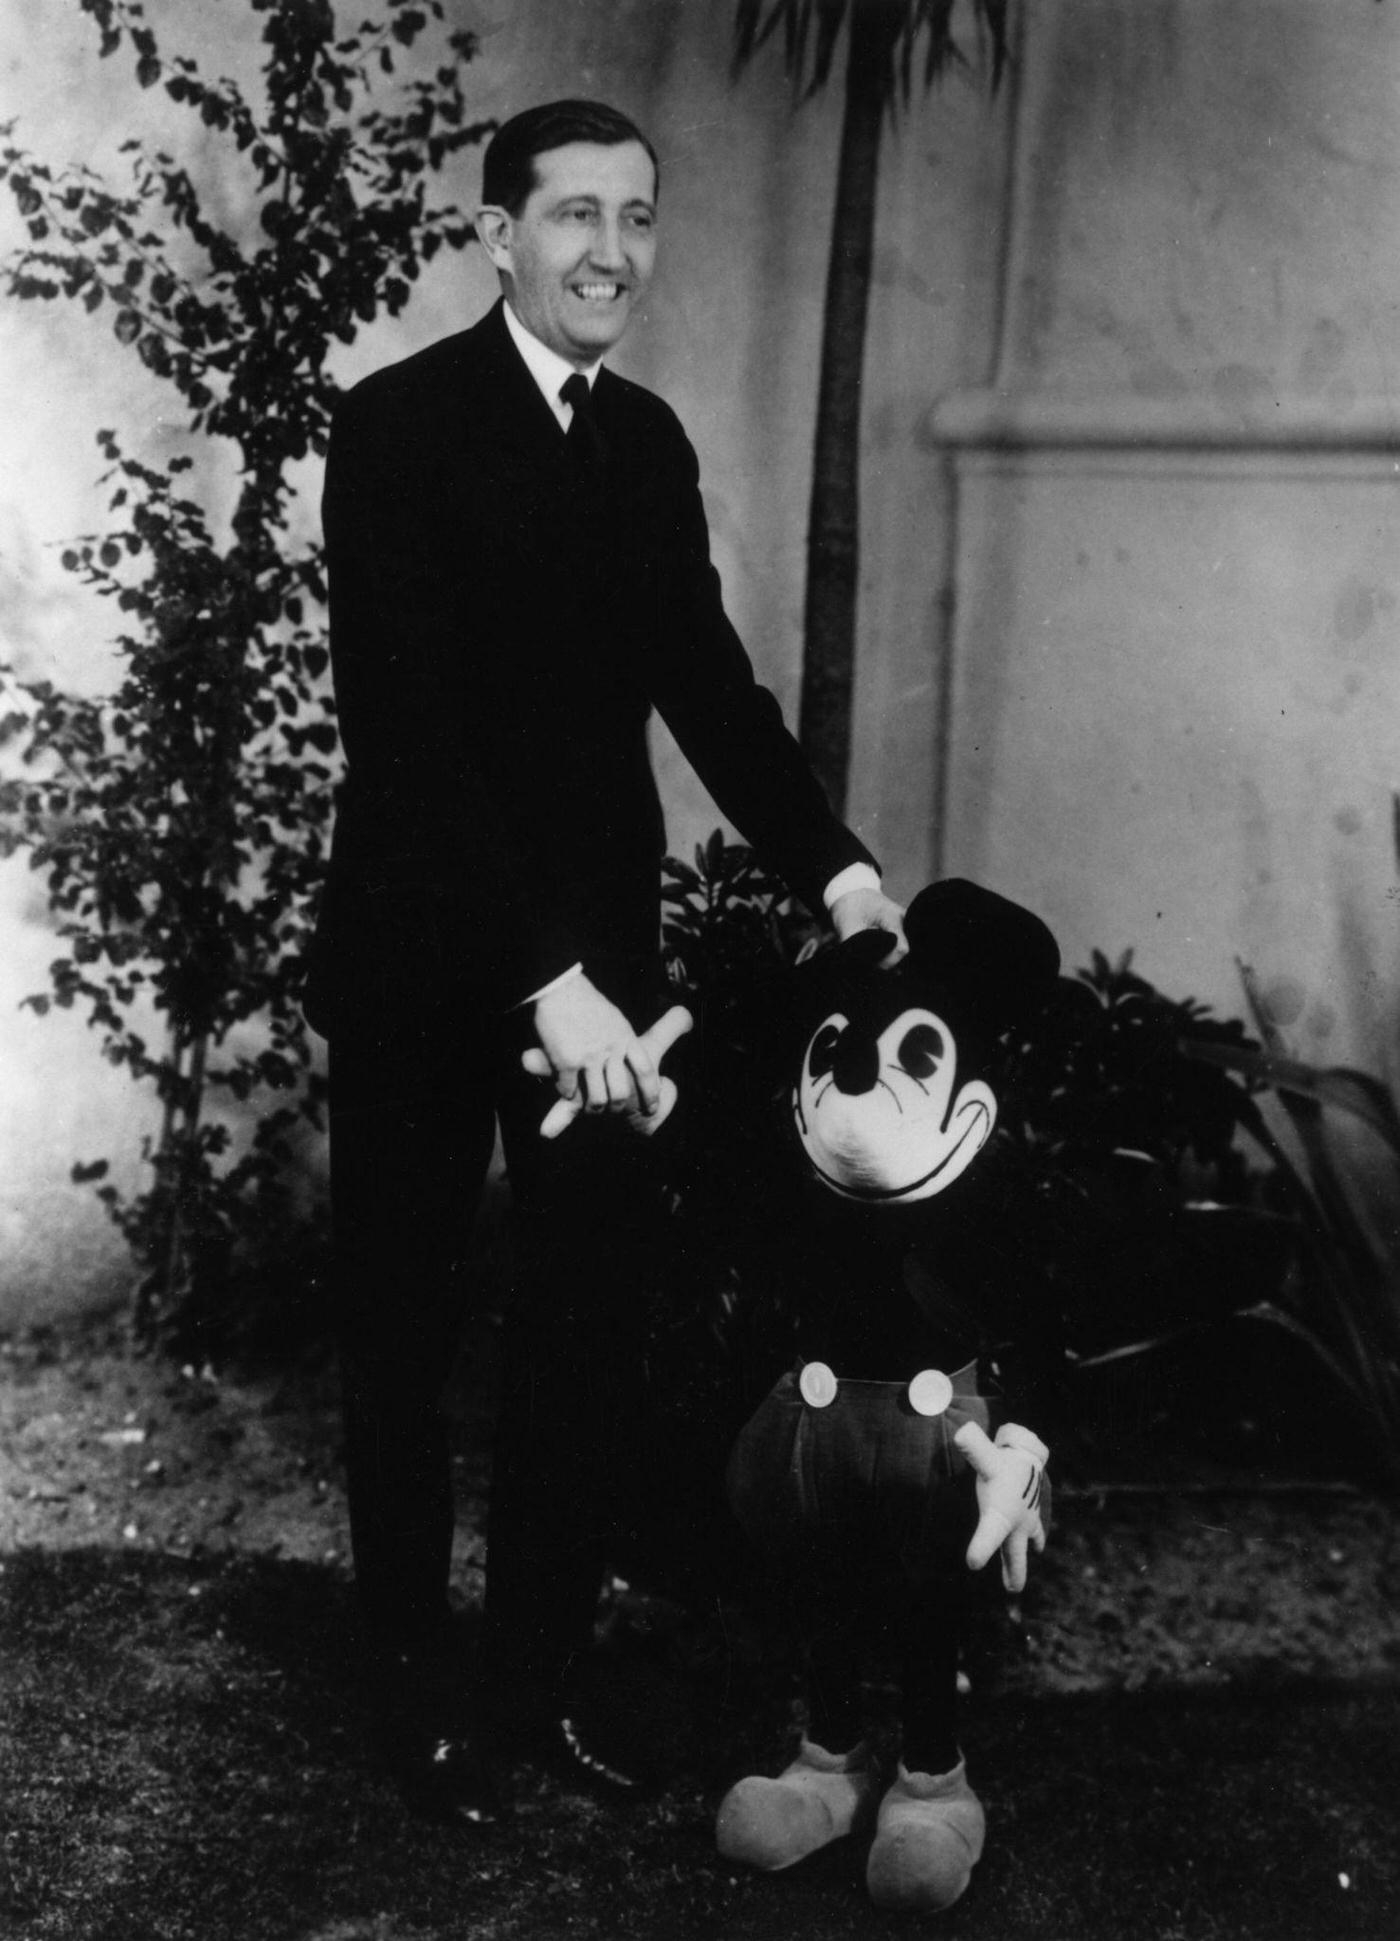 American film producer David O. Selznick with Mickey Mouse.